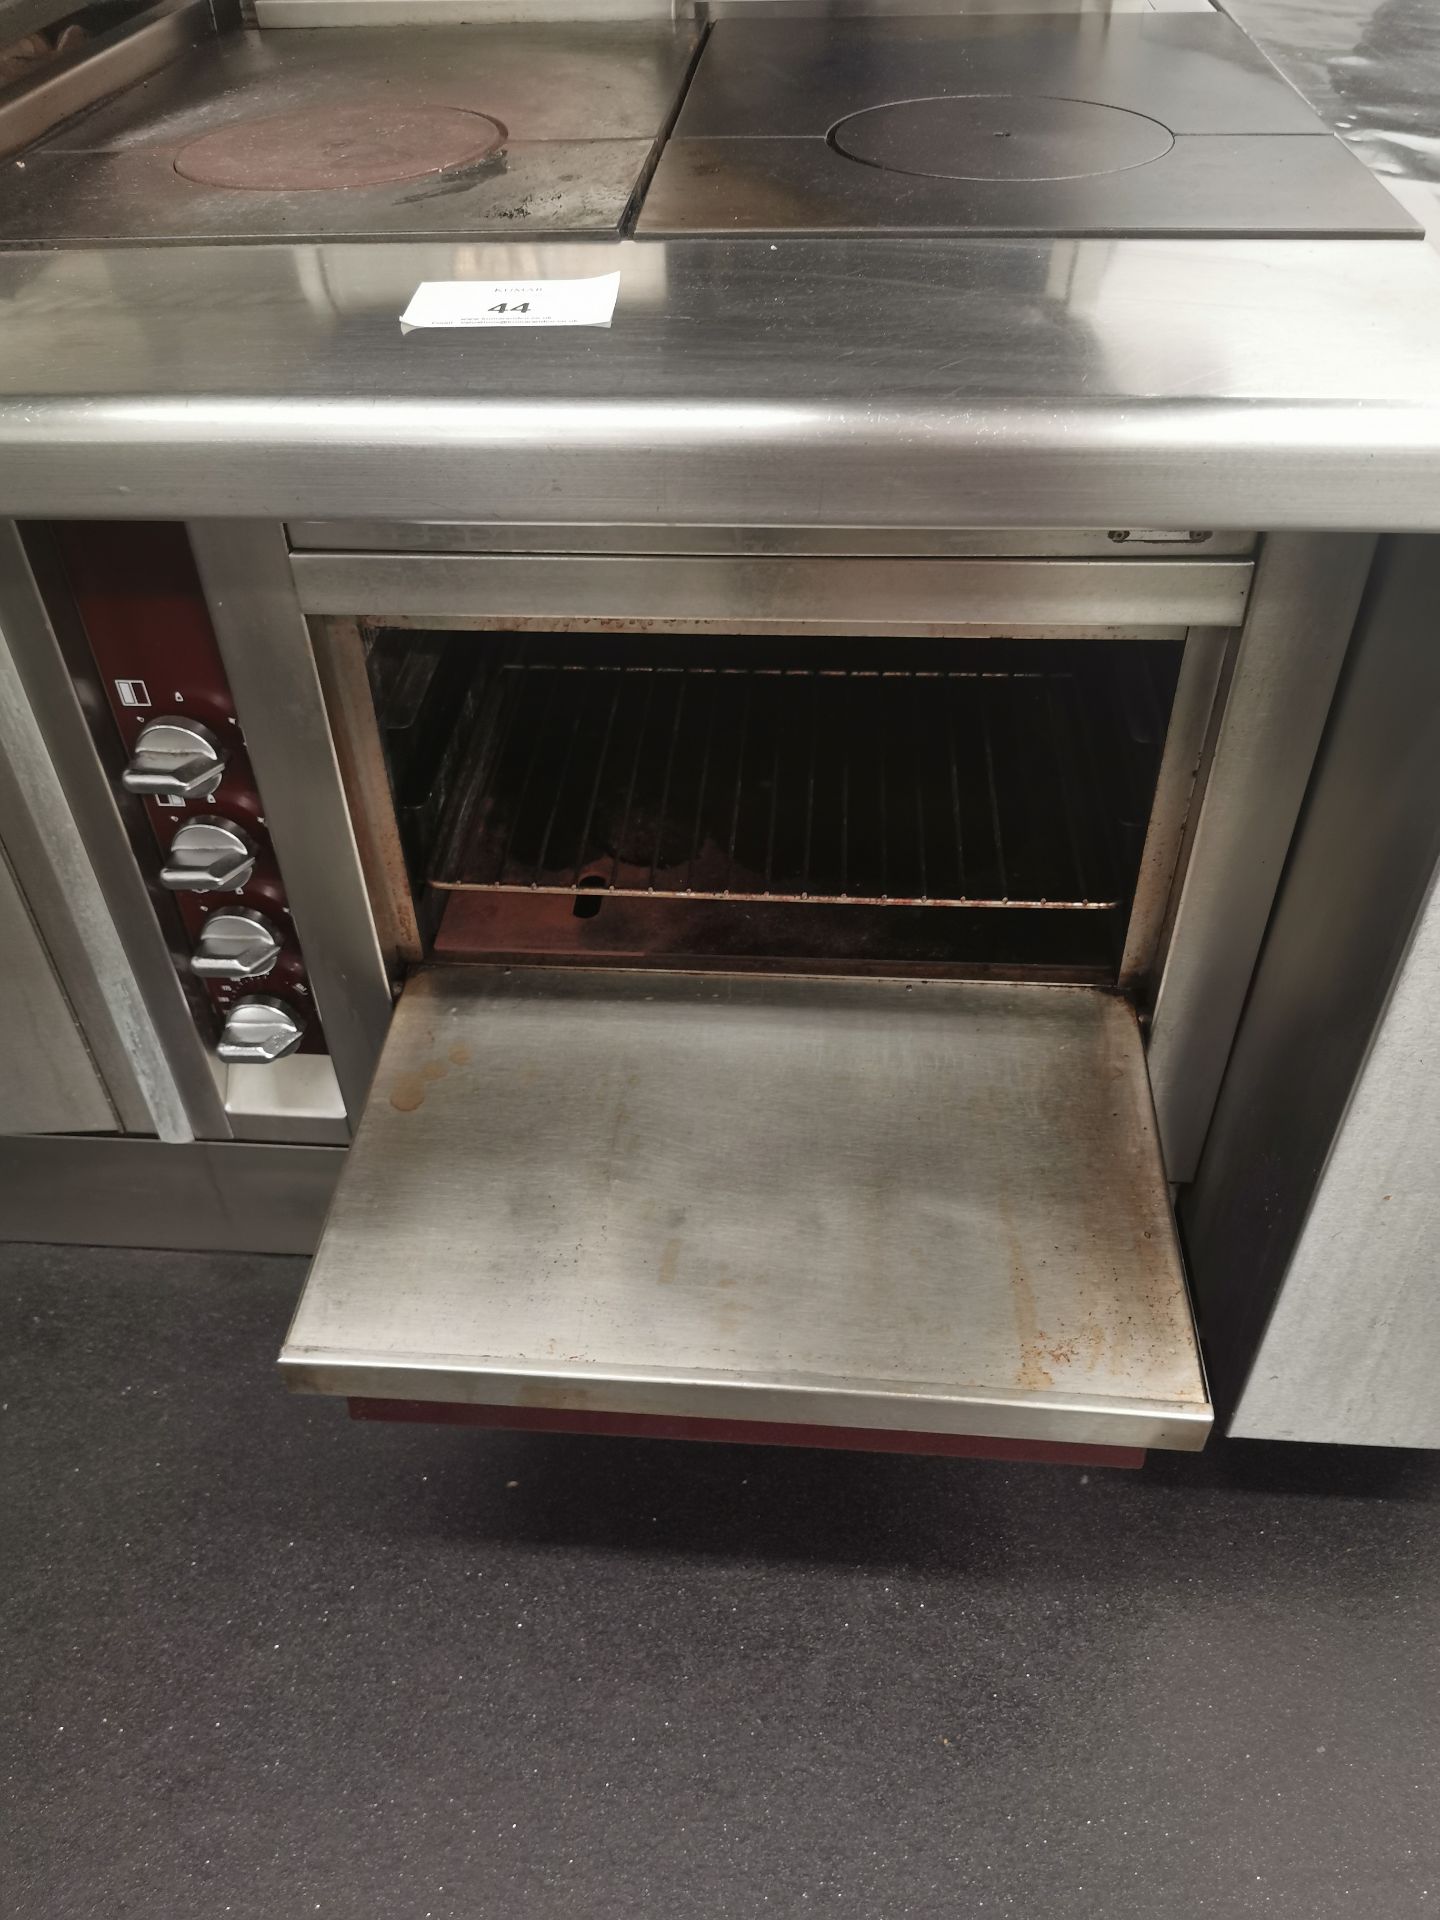 Charvet pro series twin hot plates and oven W85cm - Image 4 of 5